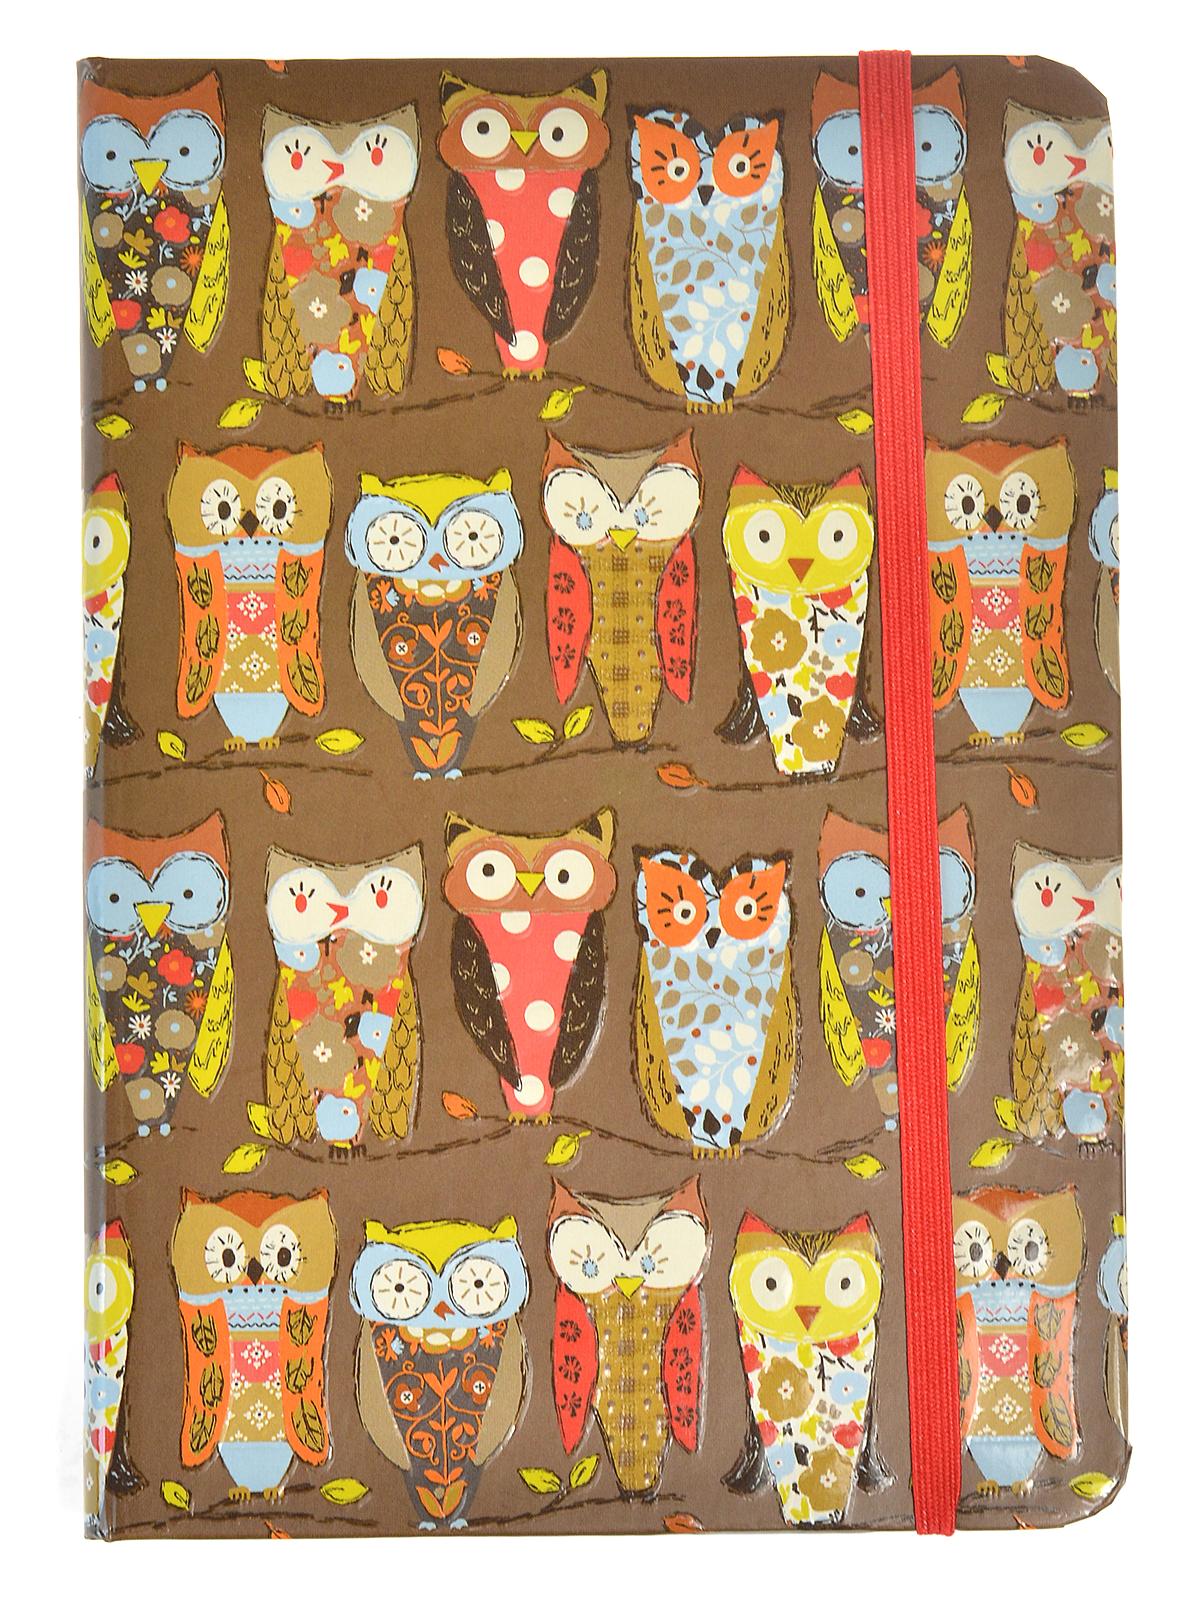 Small Format Journals Perching Owls 5 In. X 7 In. 160 Pages, Lined